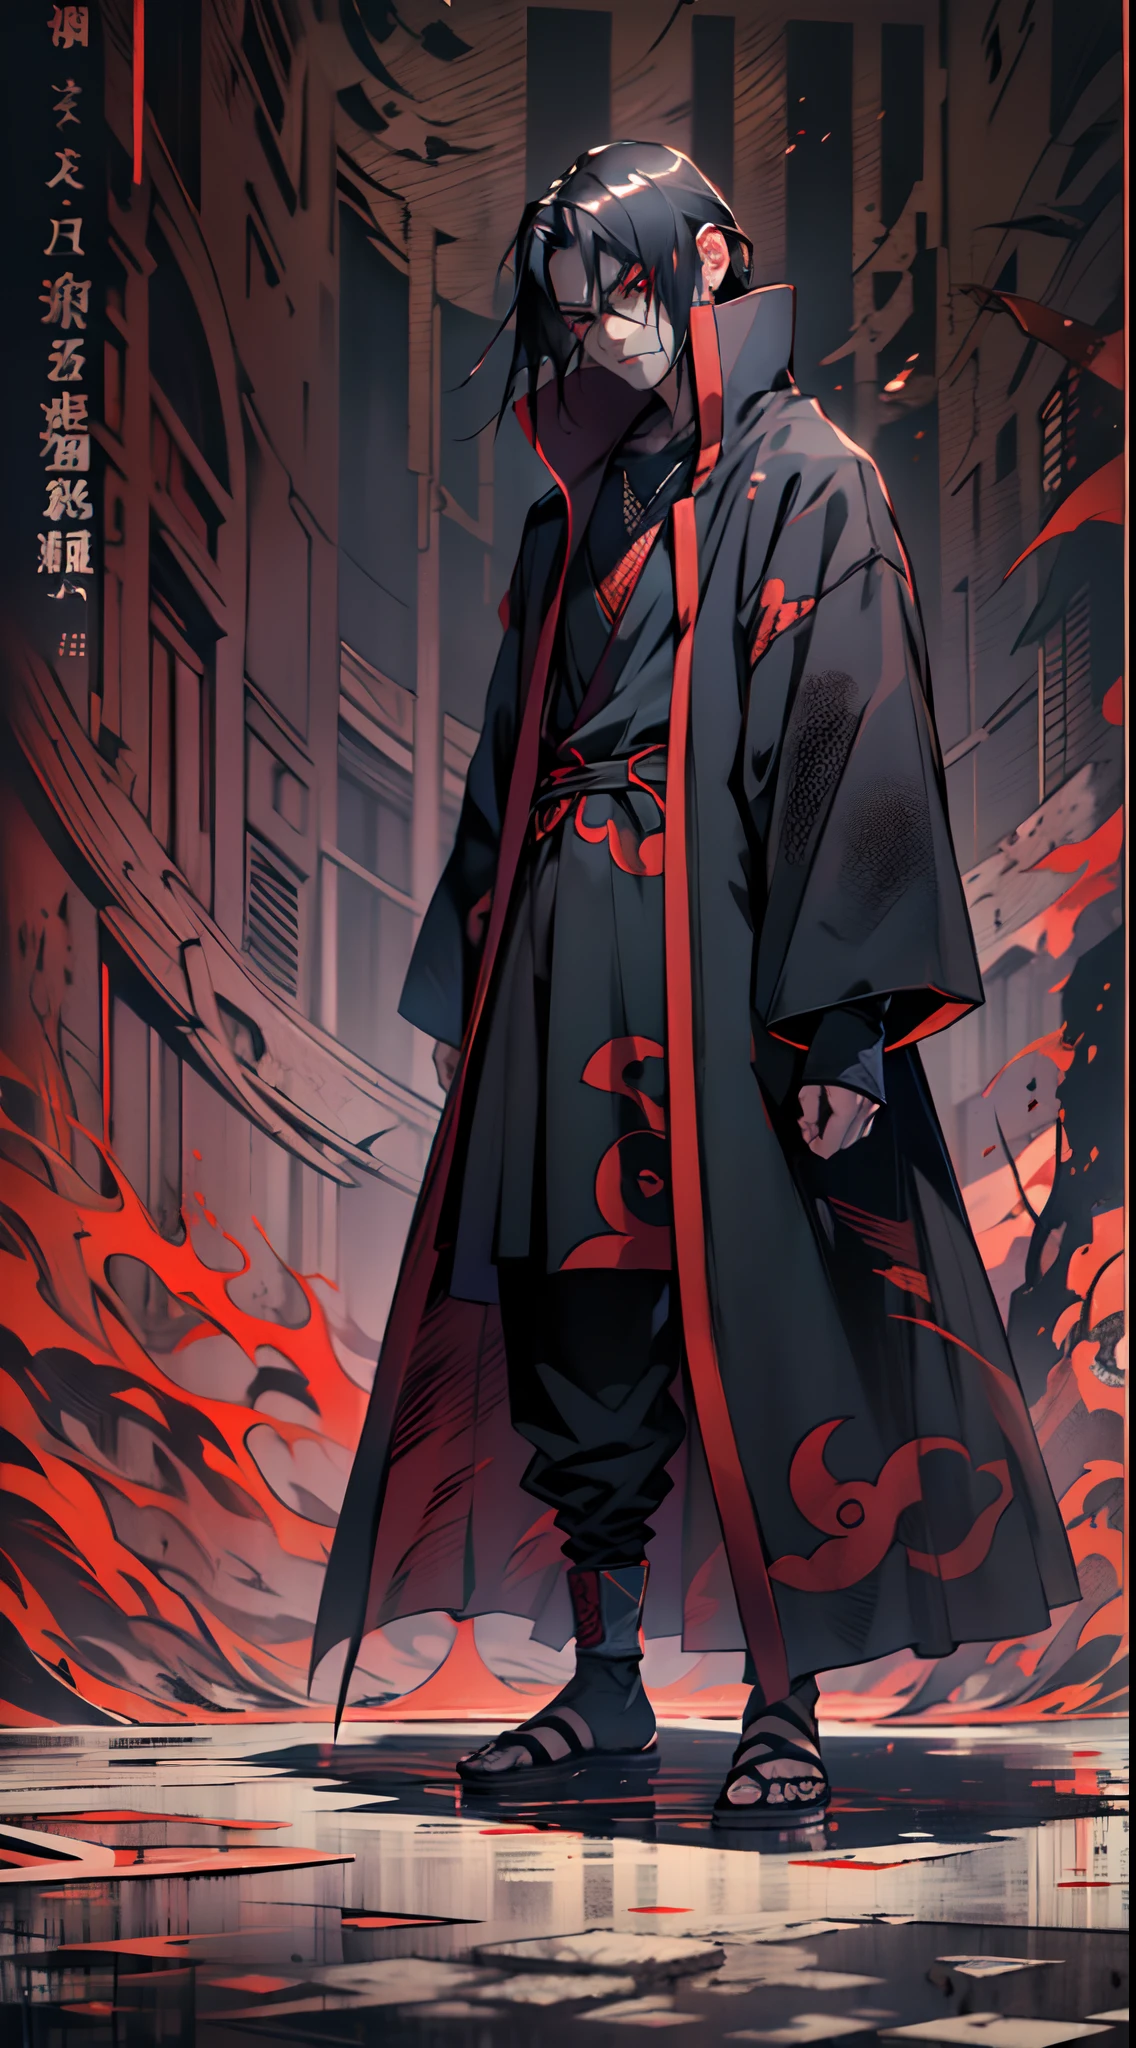 (best quality, highres:1.2),ultra-detailed, realistic, Uchiha Itachi wearing an Akatsuki coat, full body, still standing pose, Mangekyo Sharingan, intense red eyes, sleek black hair, solemn expression, confident posture, dark and ominous ambiance, manga-inspired style, vibrant colors, dynamic lighting, detailed facial features, sharp focus, dramatic shadows, textured fabric of the Akatsuki coat.